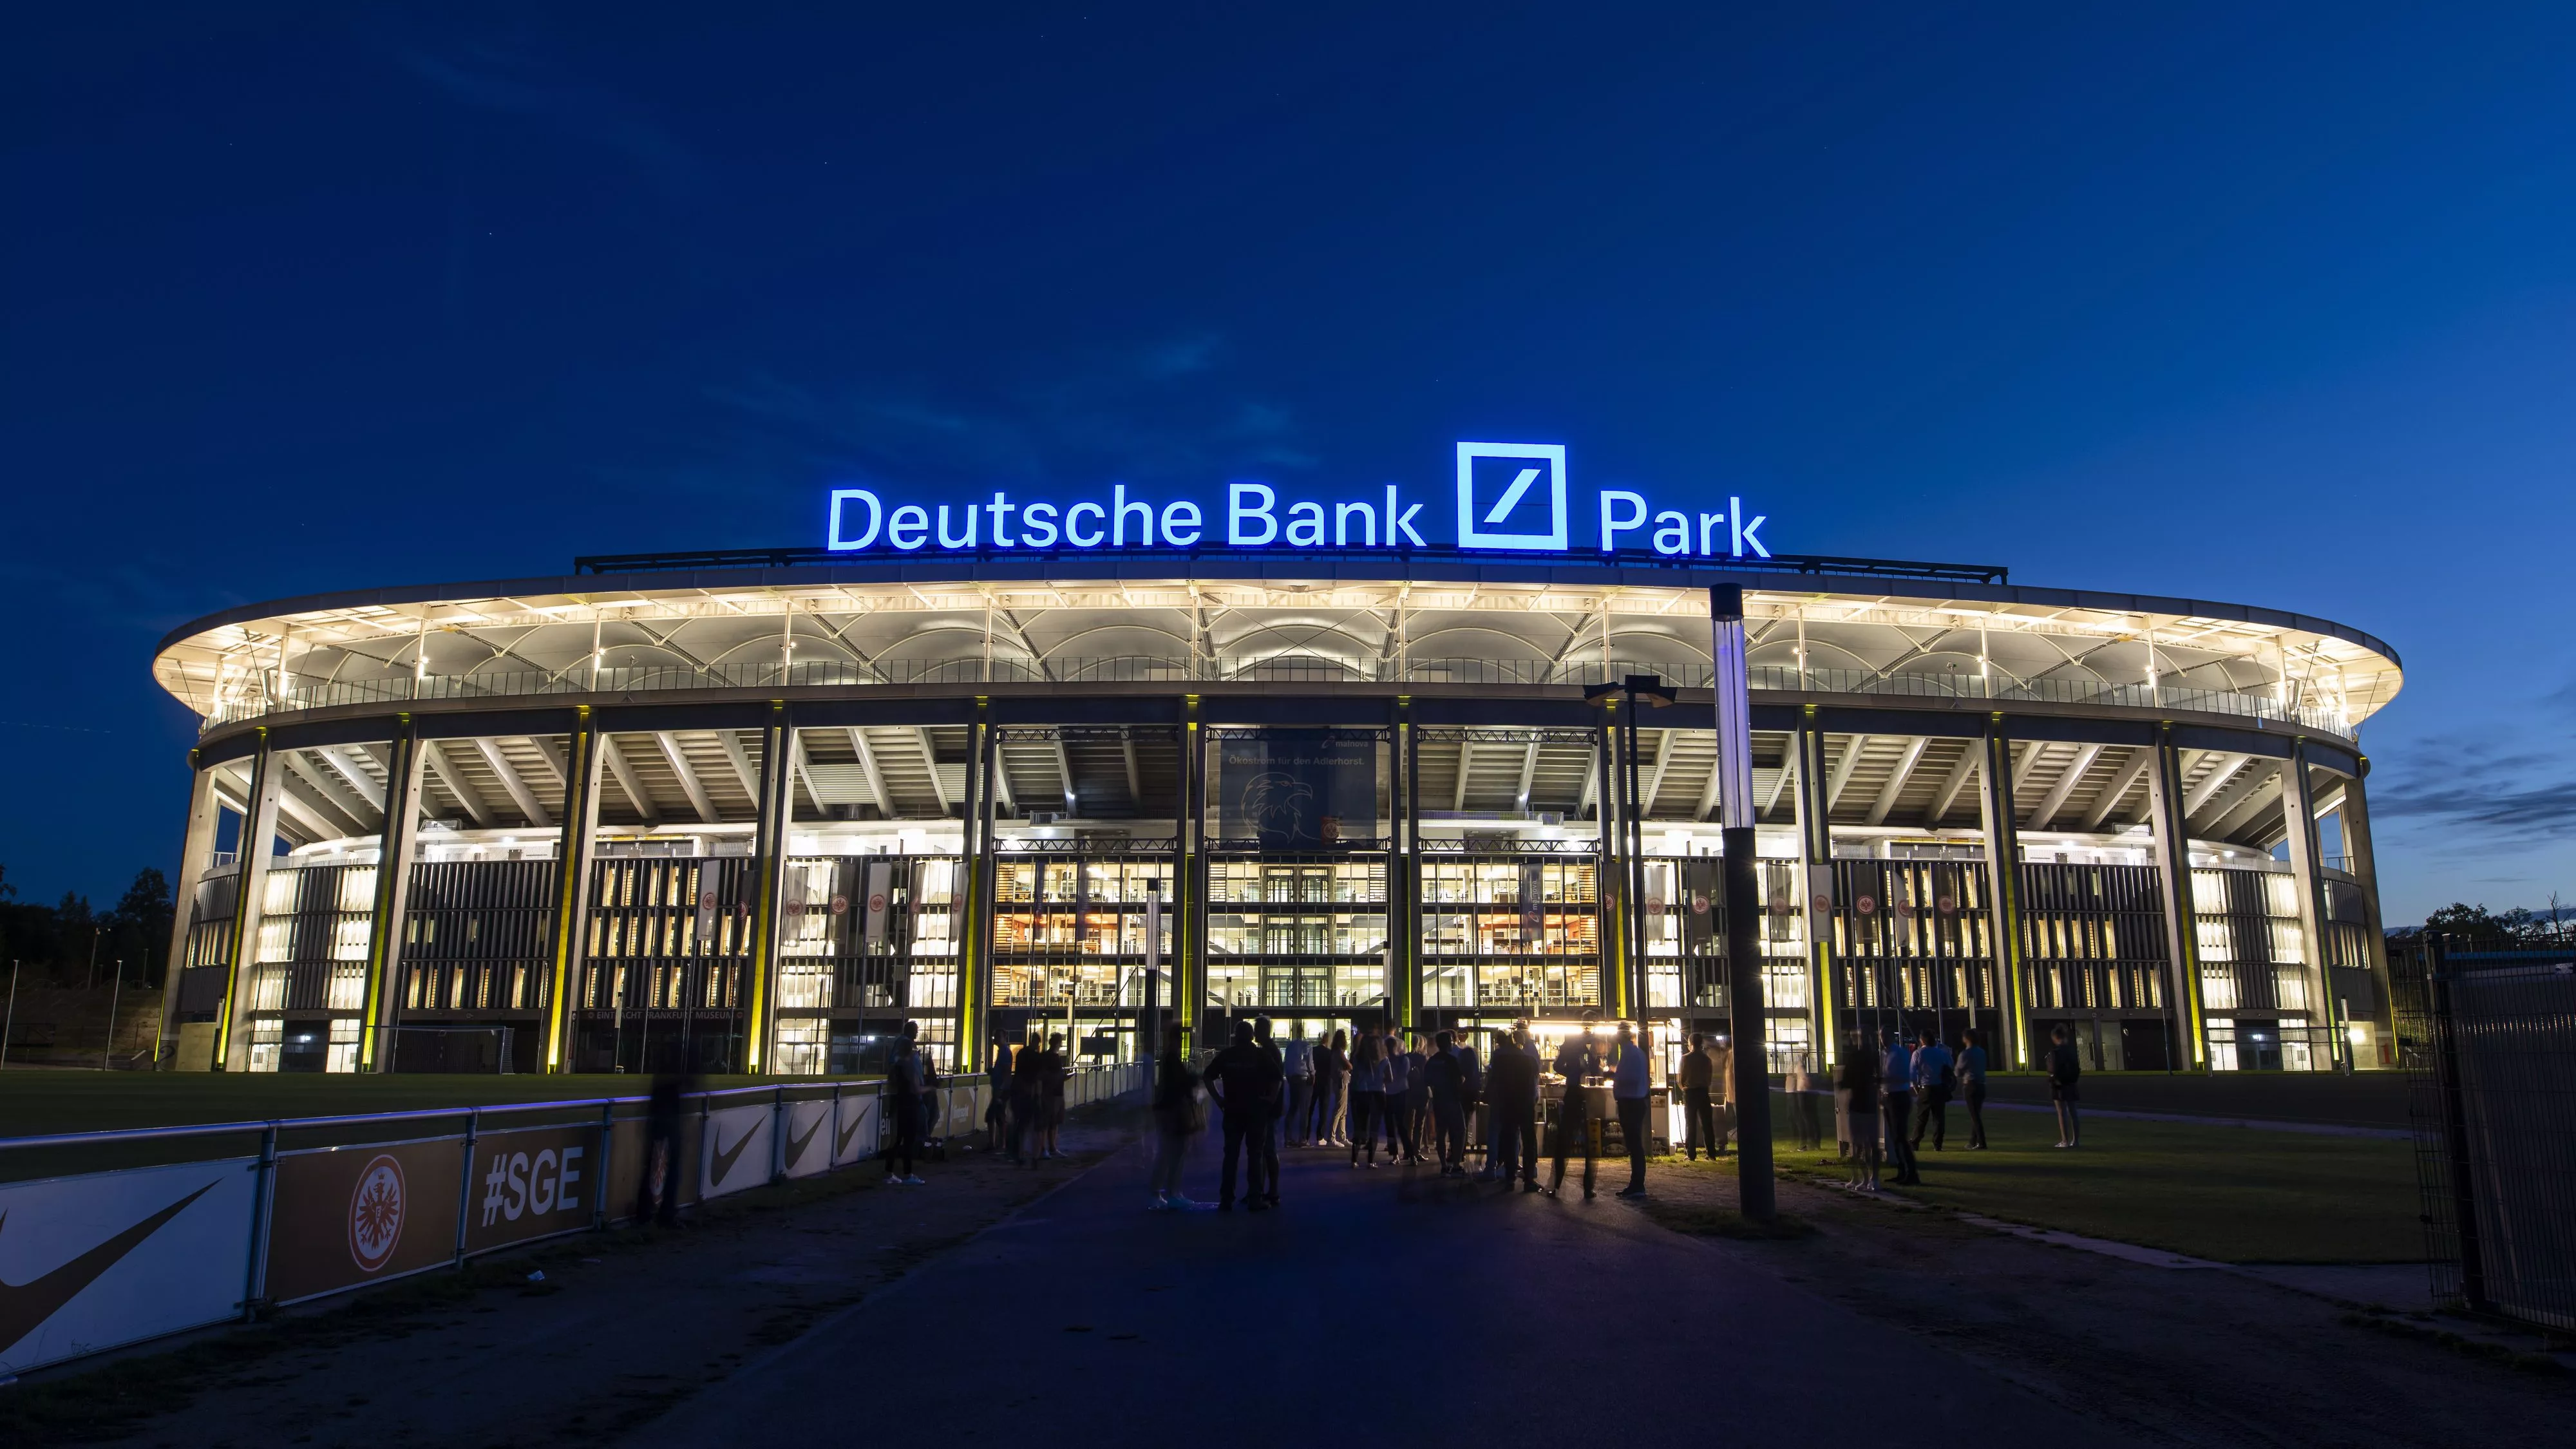 Deutsche Bank Park in Germany, Europe | Football - Rated 4.4